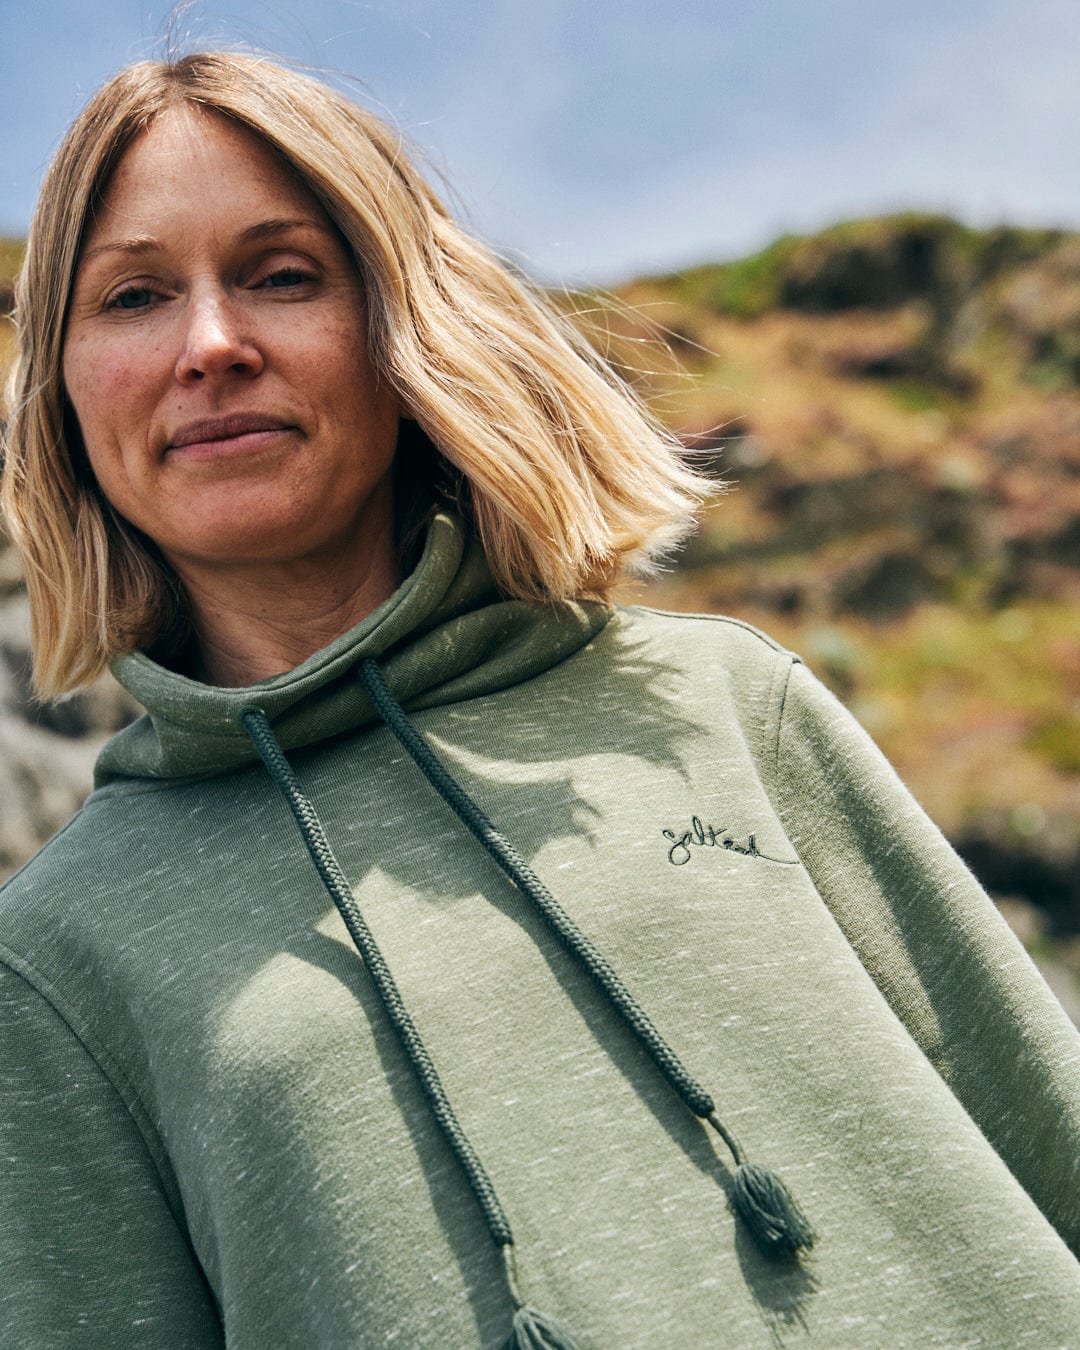 A person with shoulder-length hair is wearing the Saltrock Harper Women's Longline Pop Sweat in green, featuring embroidered branding, and is standing outdoors with a blurred natural background.